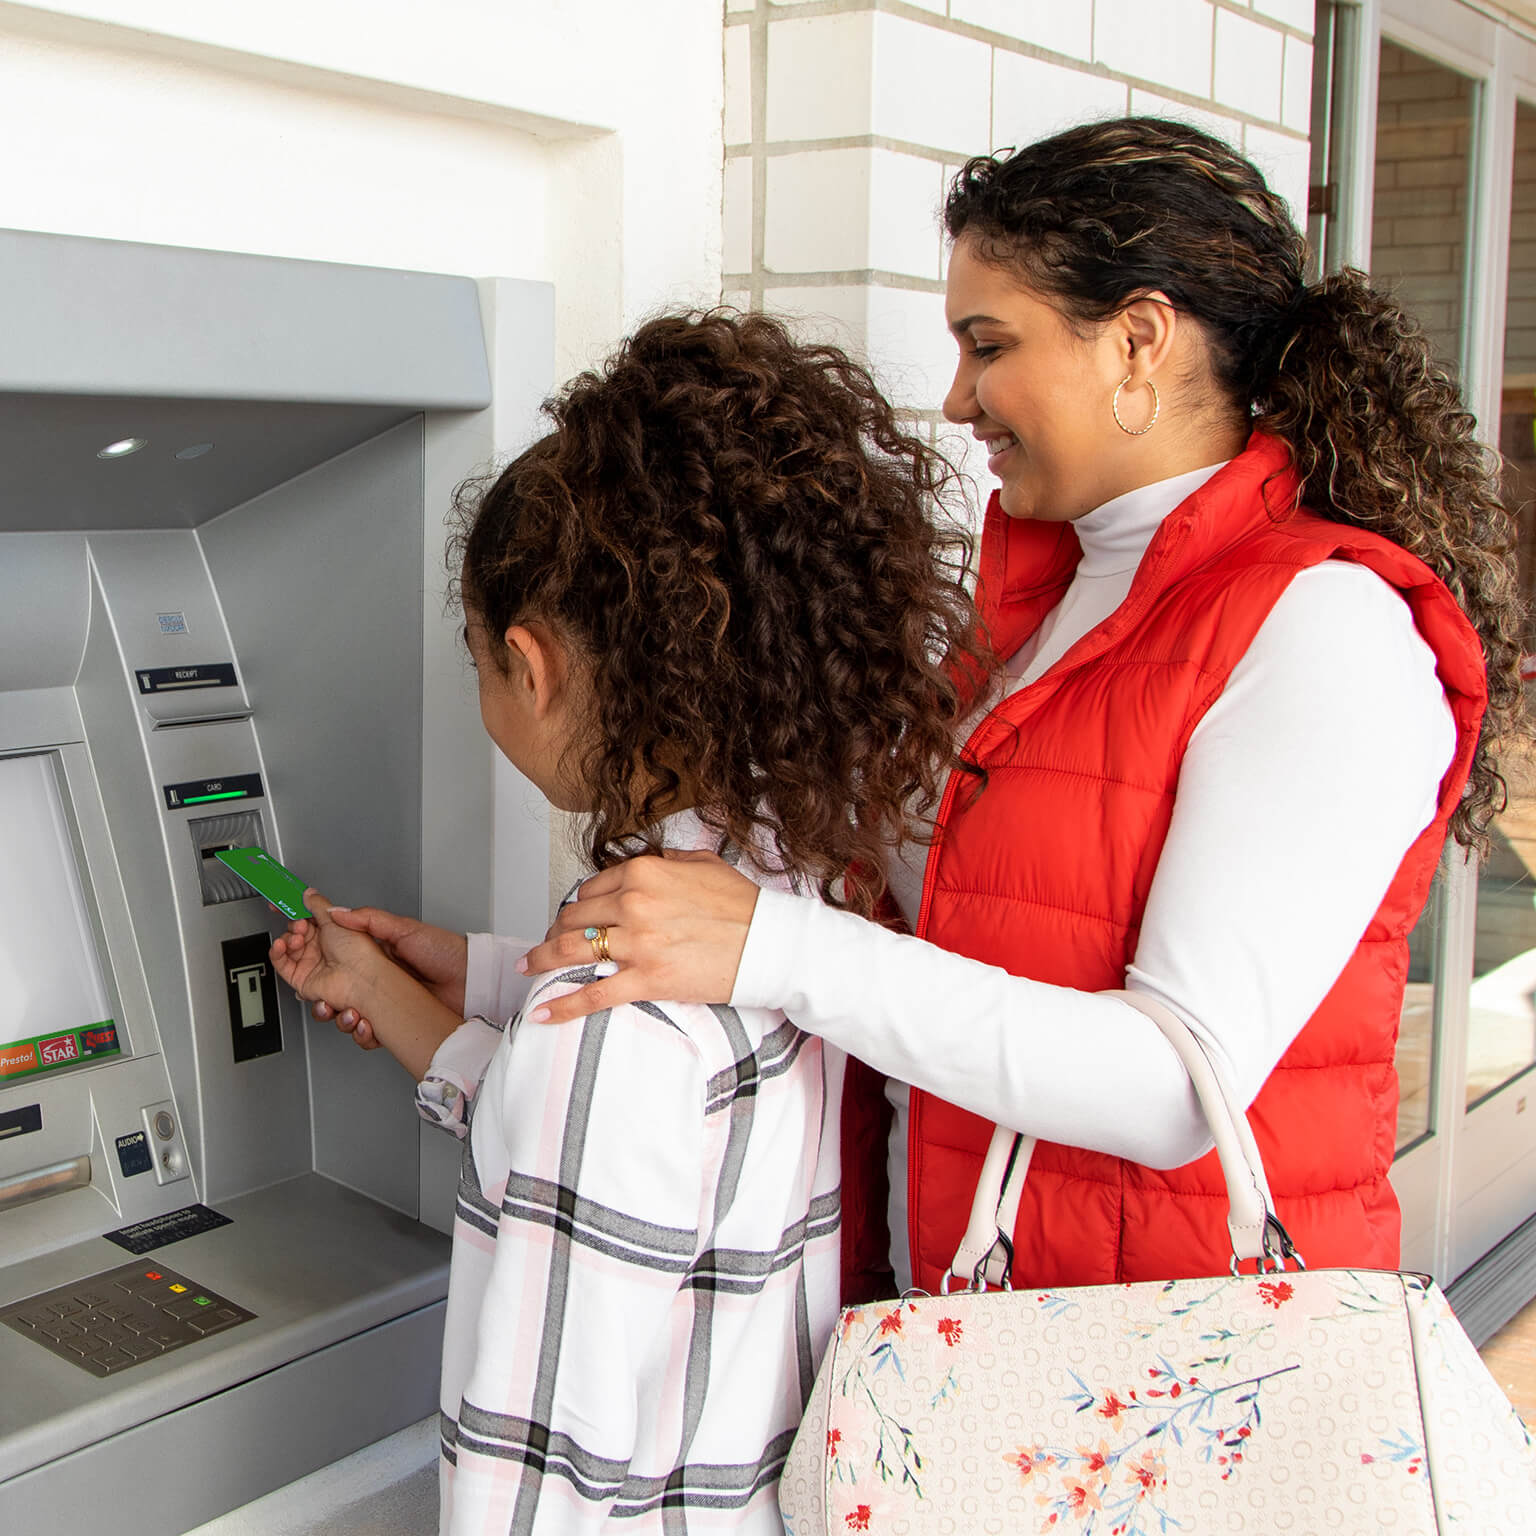 woman and girl using a debit card at an Presto ATM